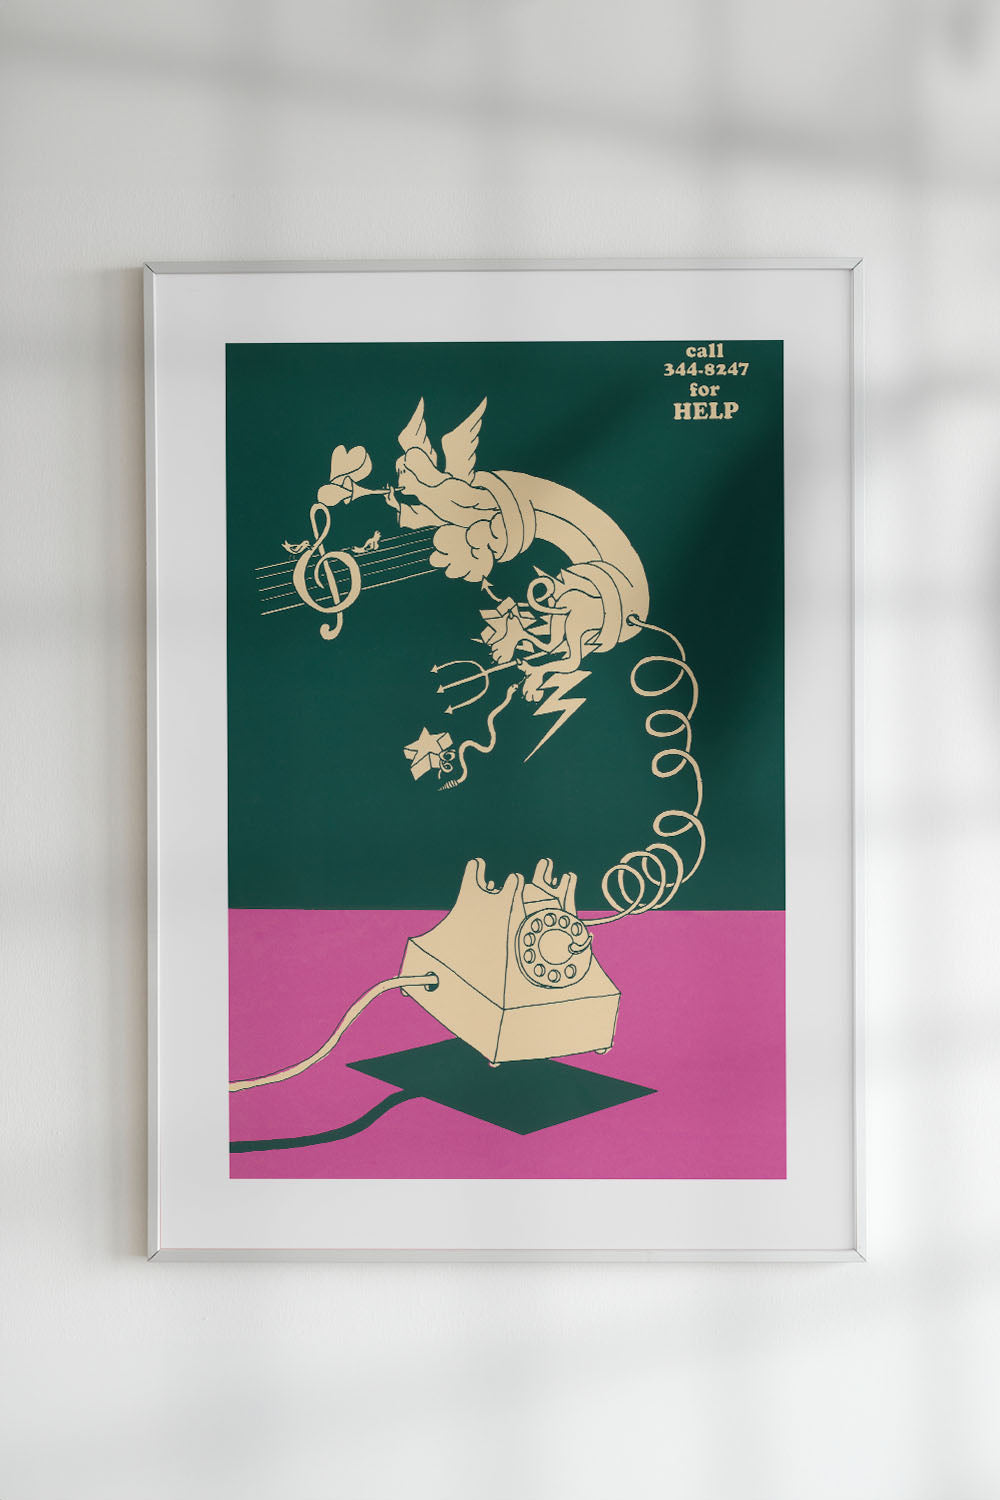 Vintage two-tone art print featuring a tan rotary phone and music note on a deep green and hot pink background.